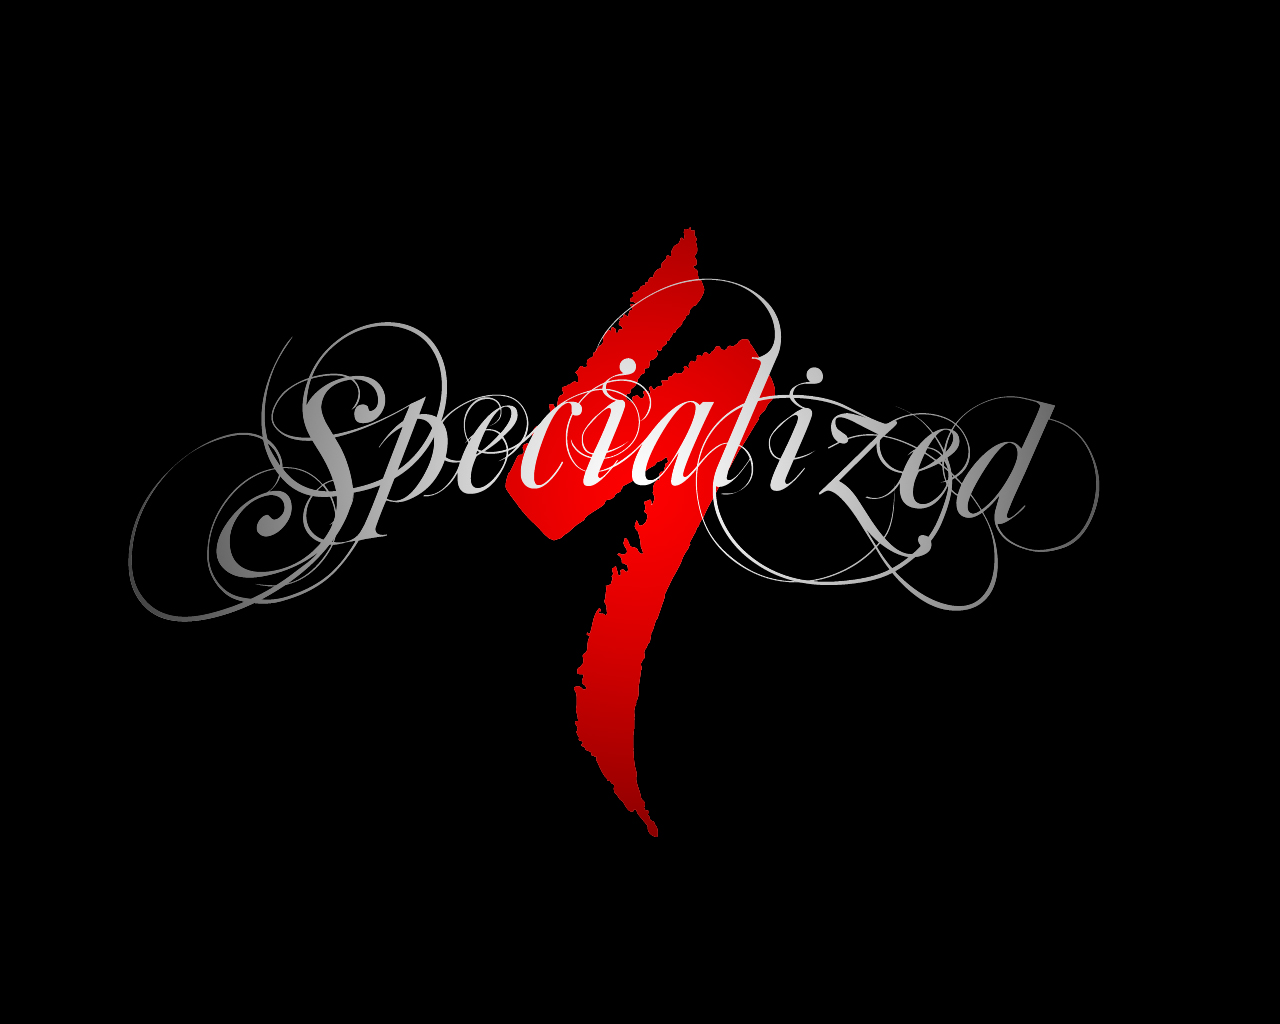 Specialized Wallpaper Black By Fl1p51d3 Customization